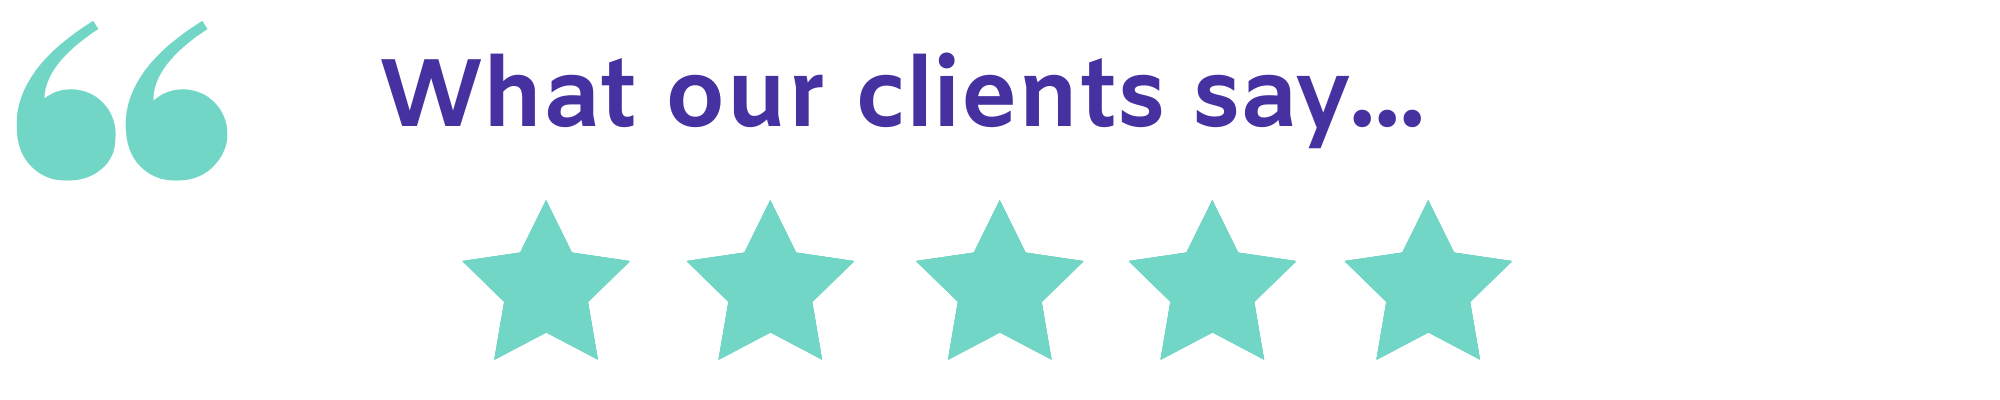 What our clients say...5 stars